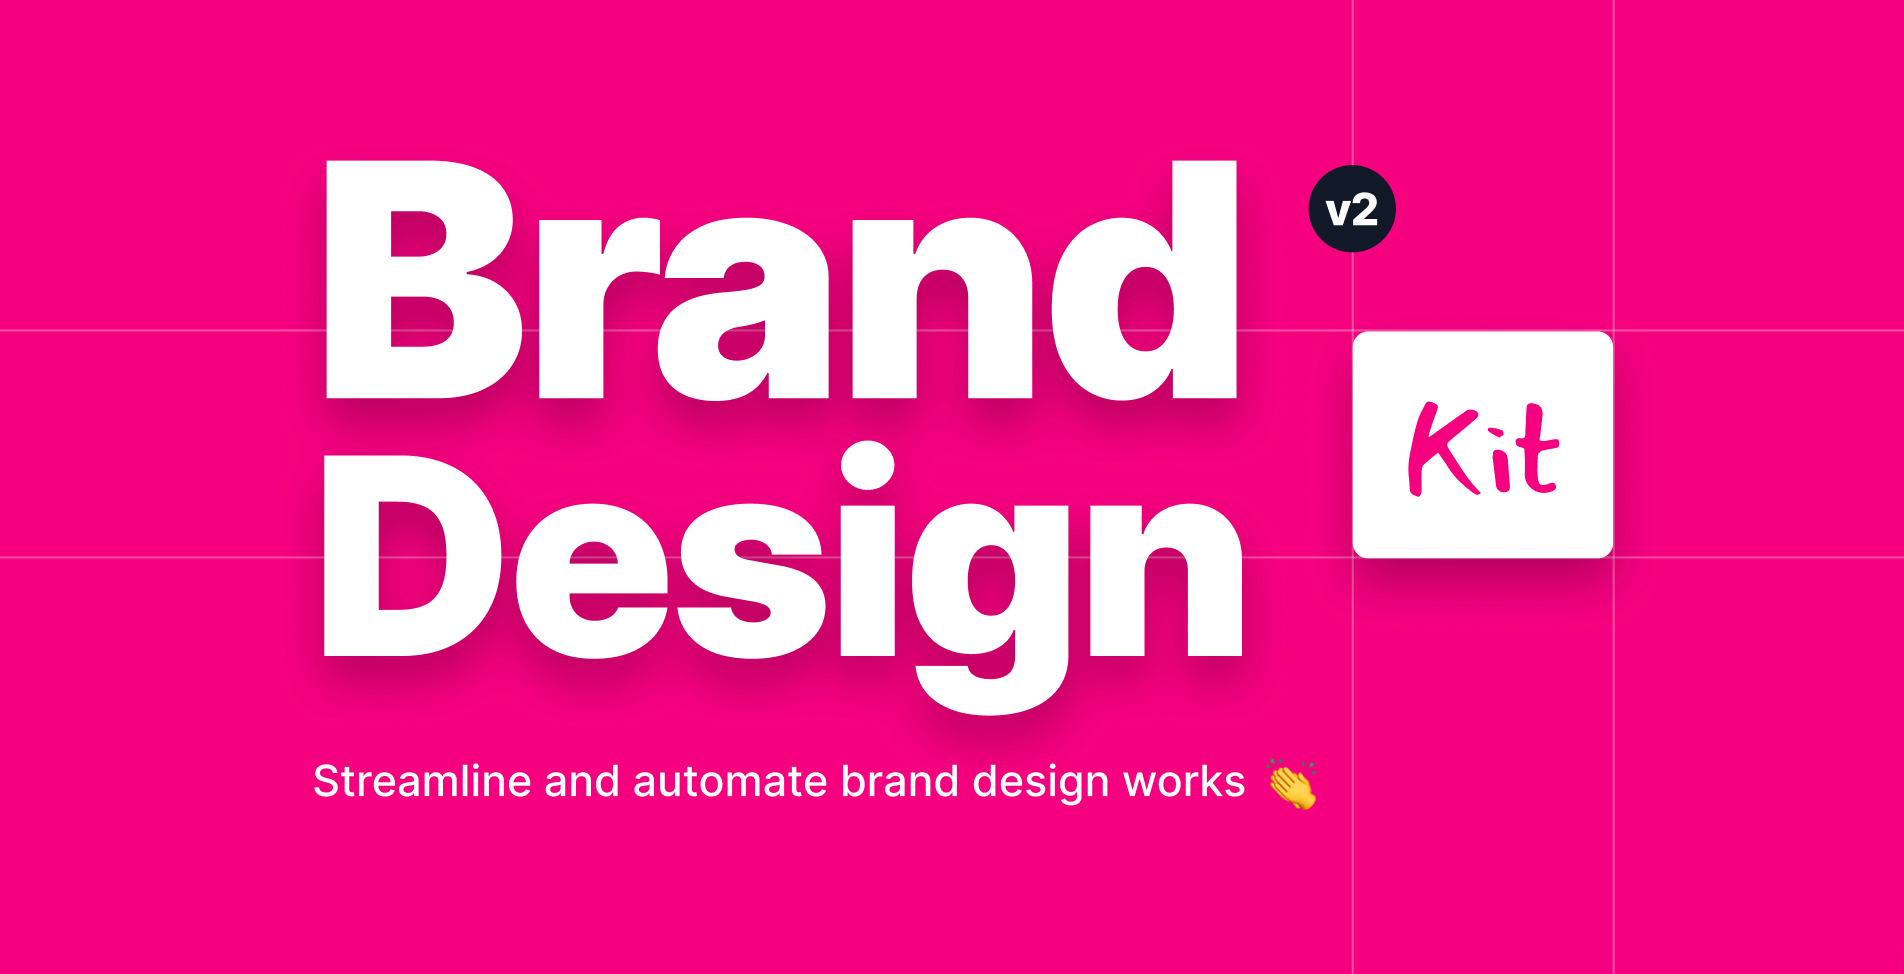 Creating Effective Brand Guidelines:Brand Guidelines Design Kit from Tomasz Wieczorek